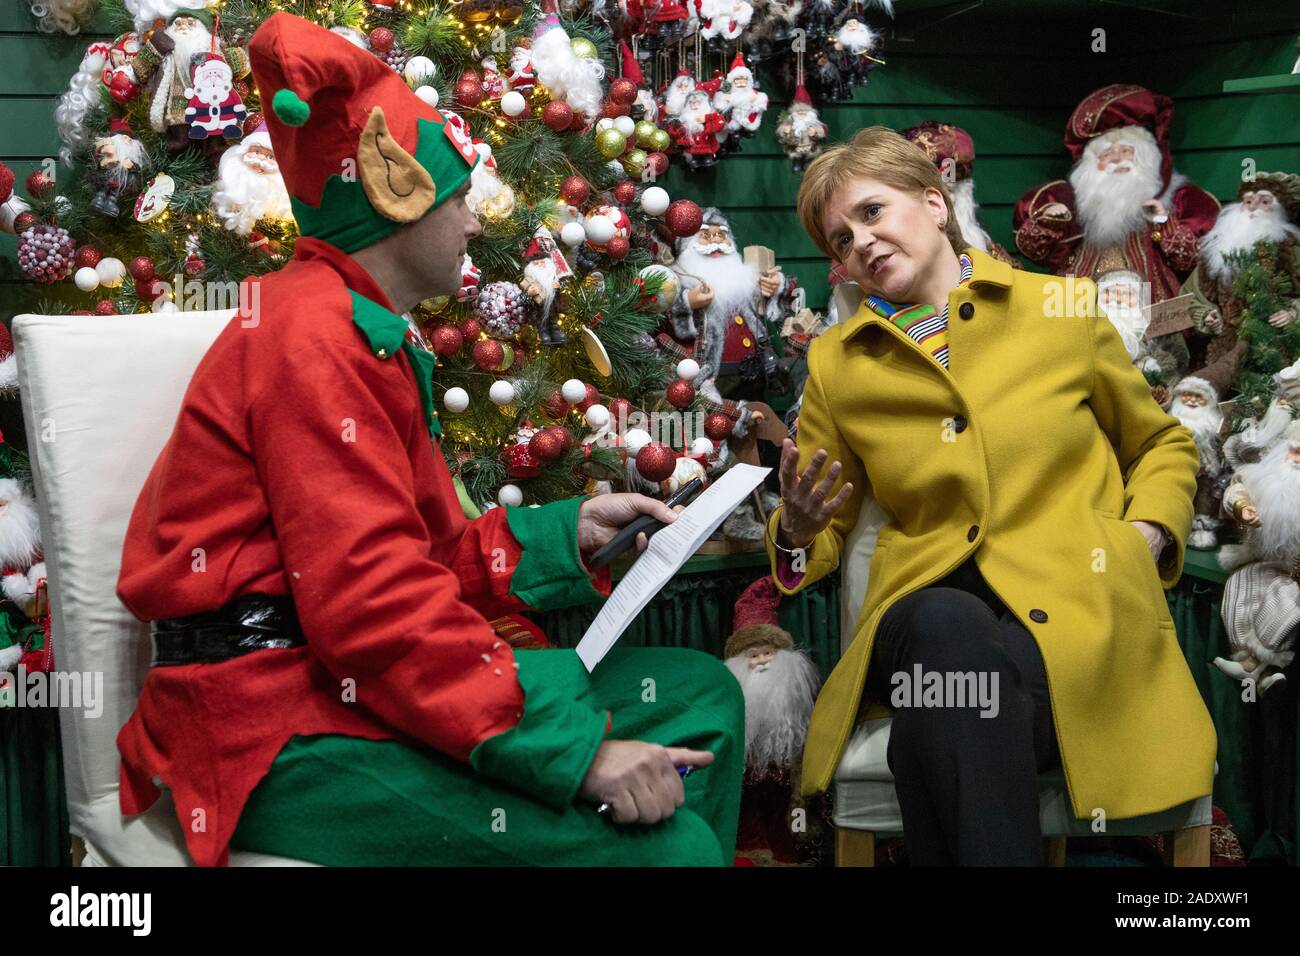 SNP leader Nicola Sturgeon is interviewed by a journalist dressed as a Christmas elf in the Nutcracker Christmas Village shop during a visit to Crieff Visitors Centre, Crieff, on the General Election campaign trail. Stock Photo